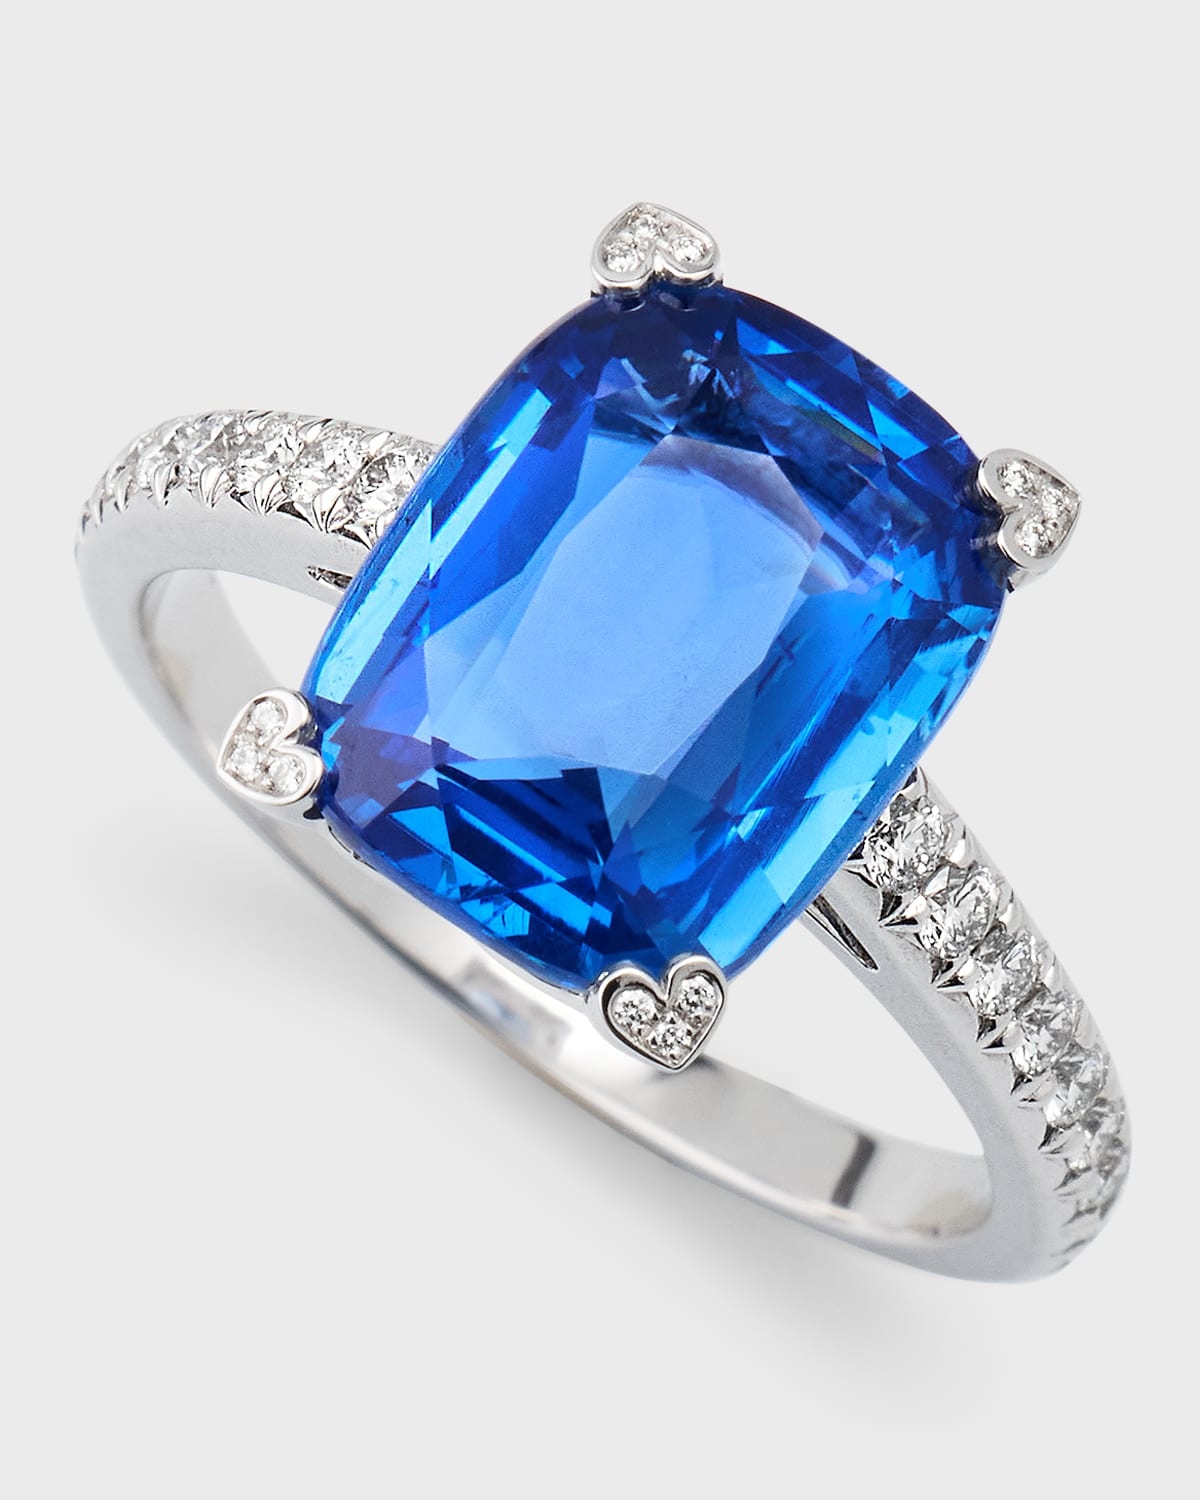 High Jewelry 18K White Gold One-of-a-Kind Blue Sapphire Solitaire Ring - 4